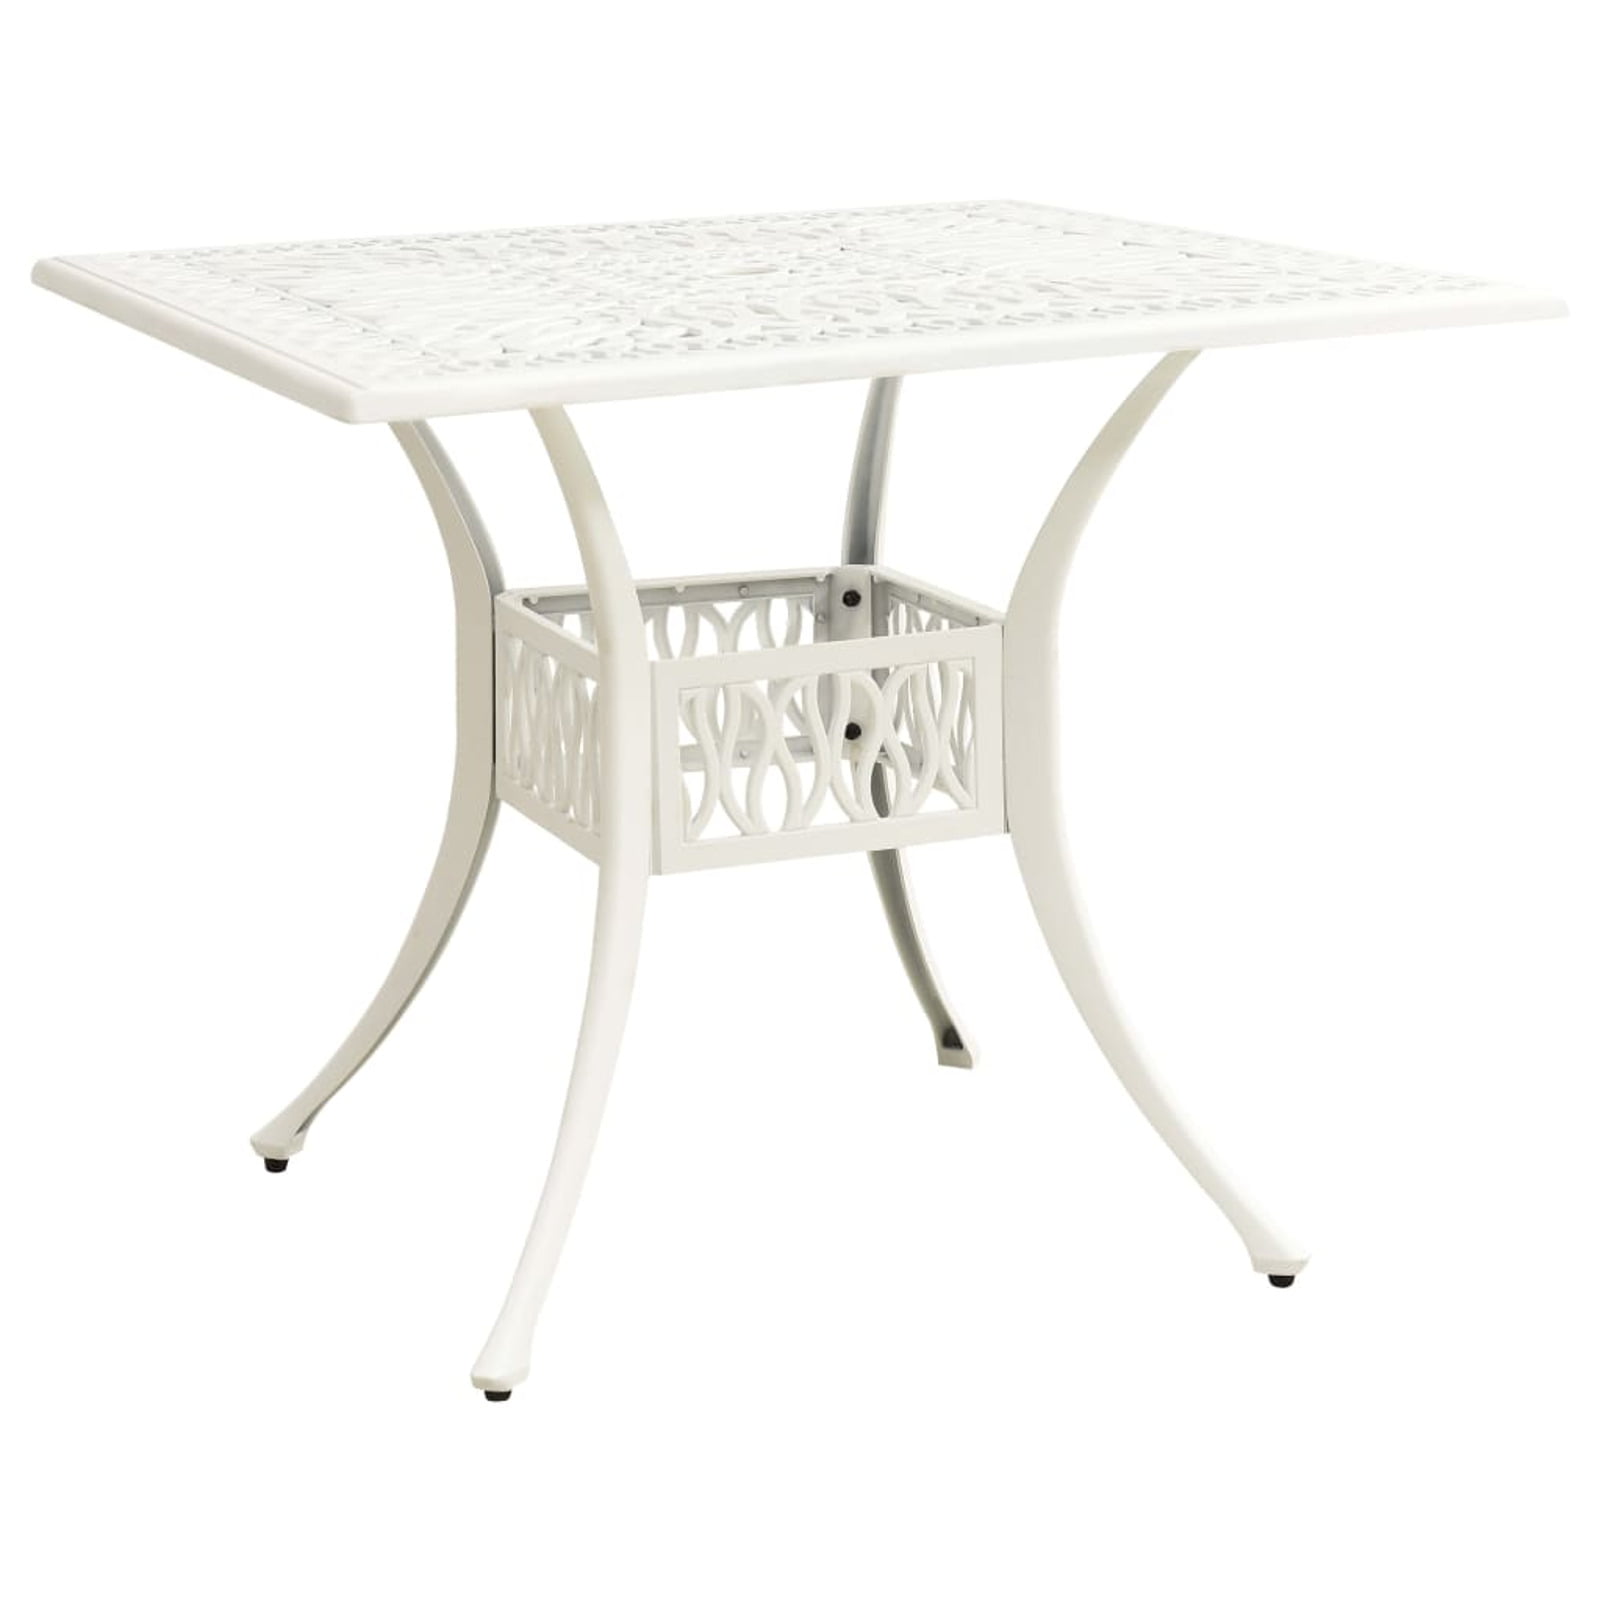 Details about   Patio Dining Table Steel Mesh Tabletop Round Outdoor Umbrella Hole Lattice White 